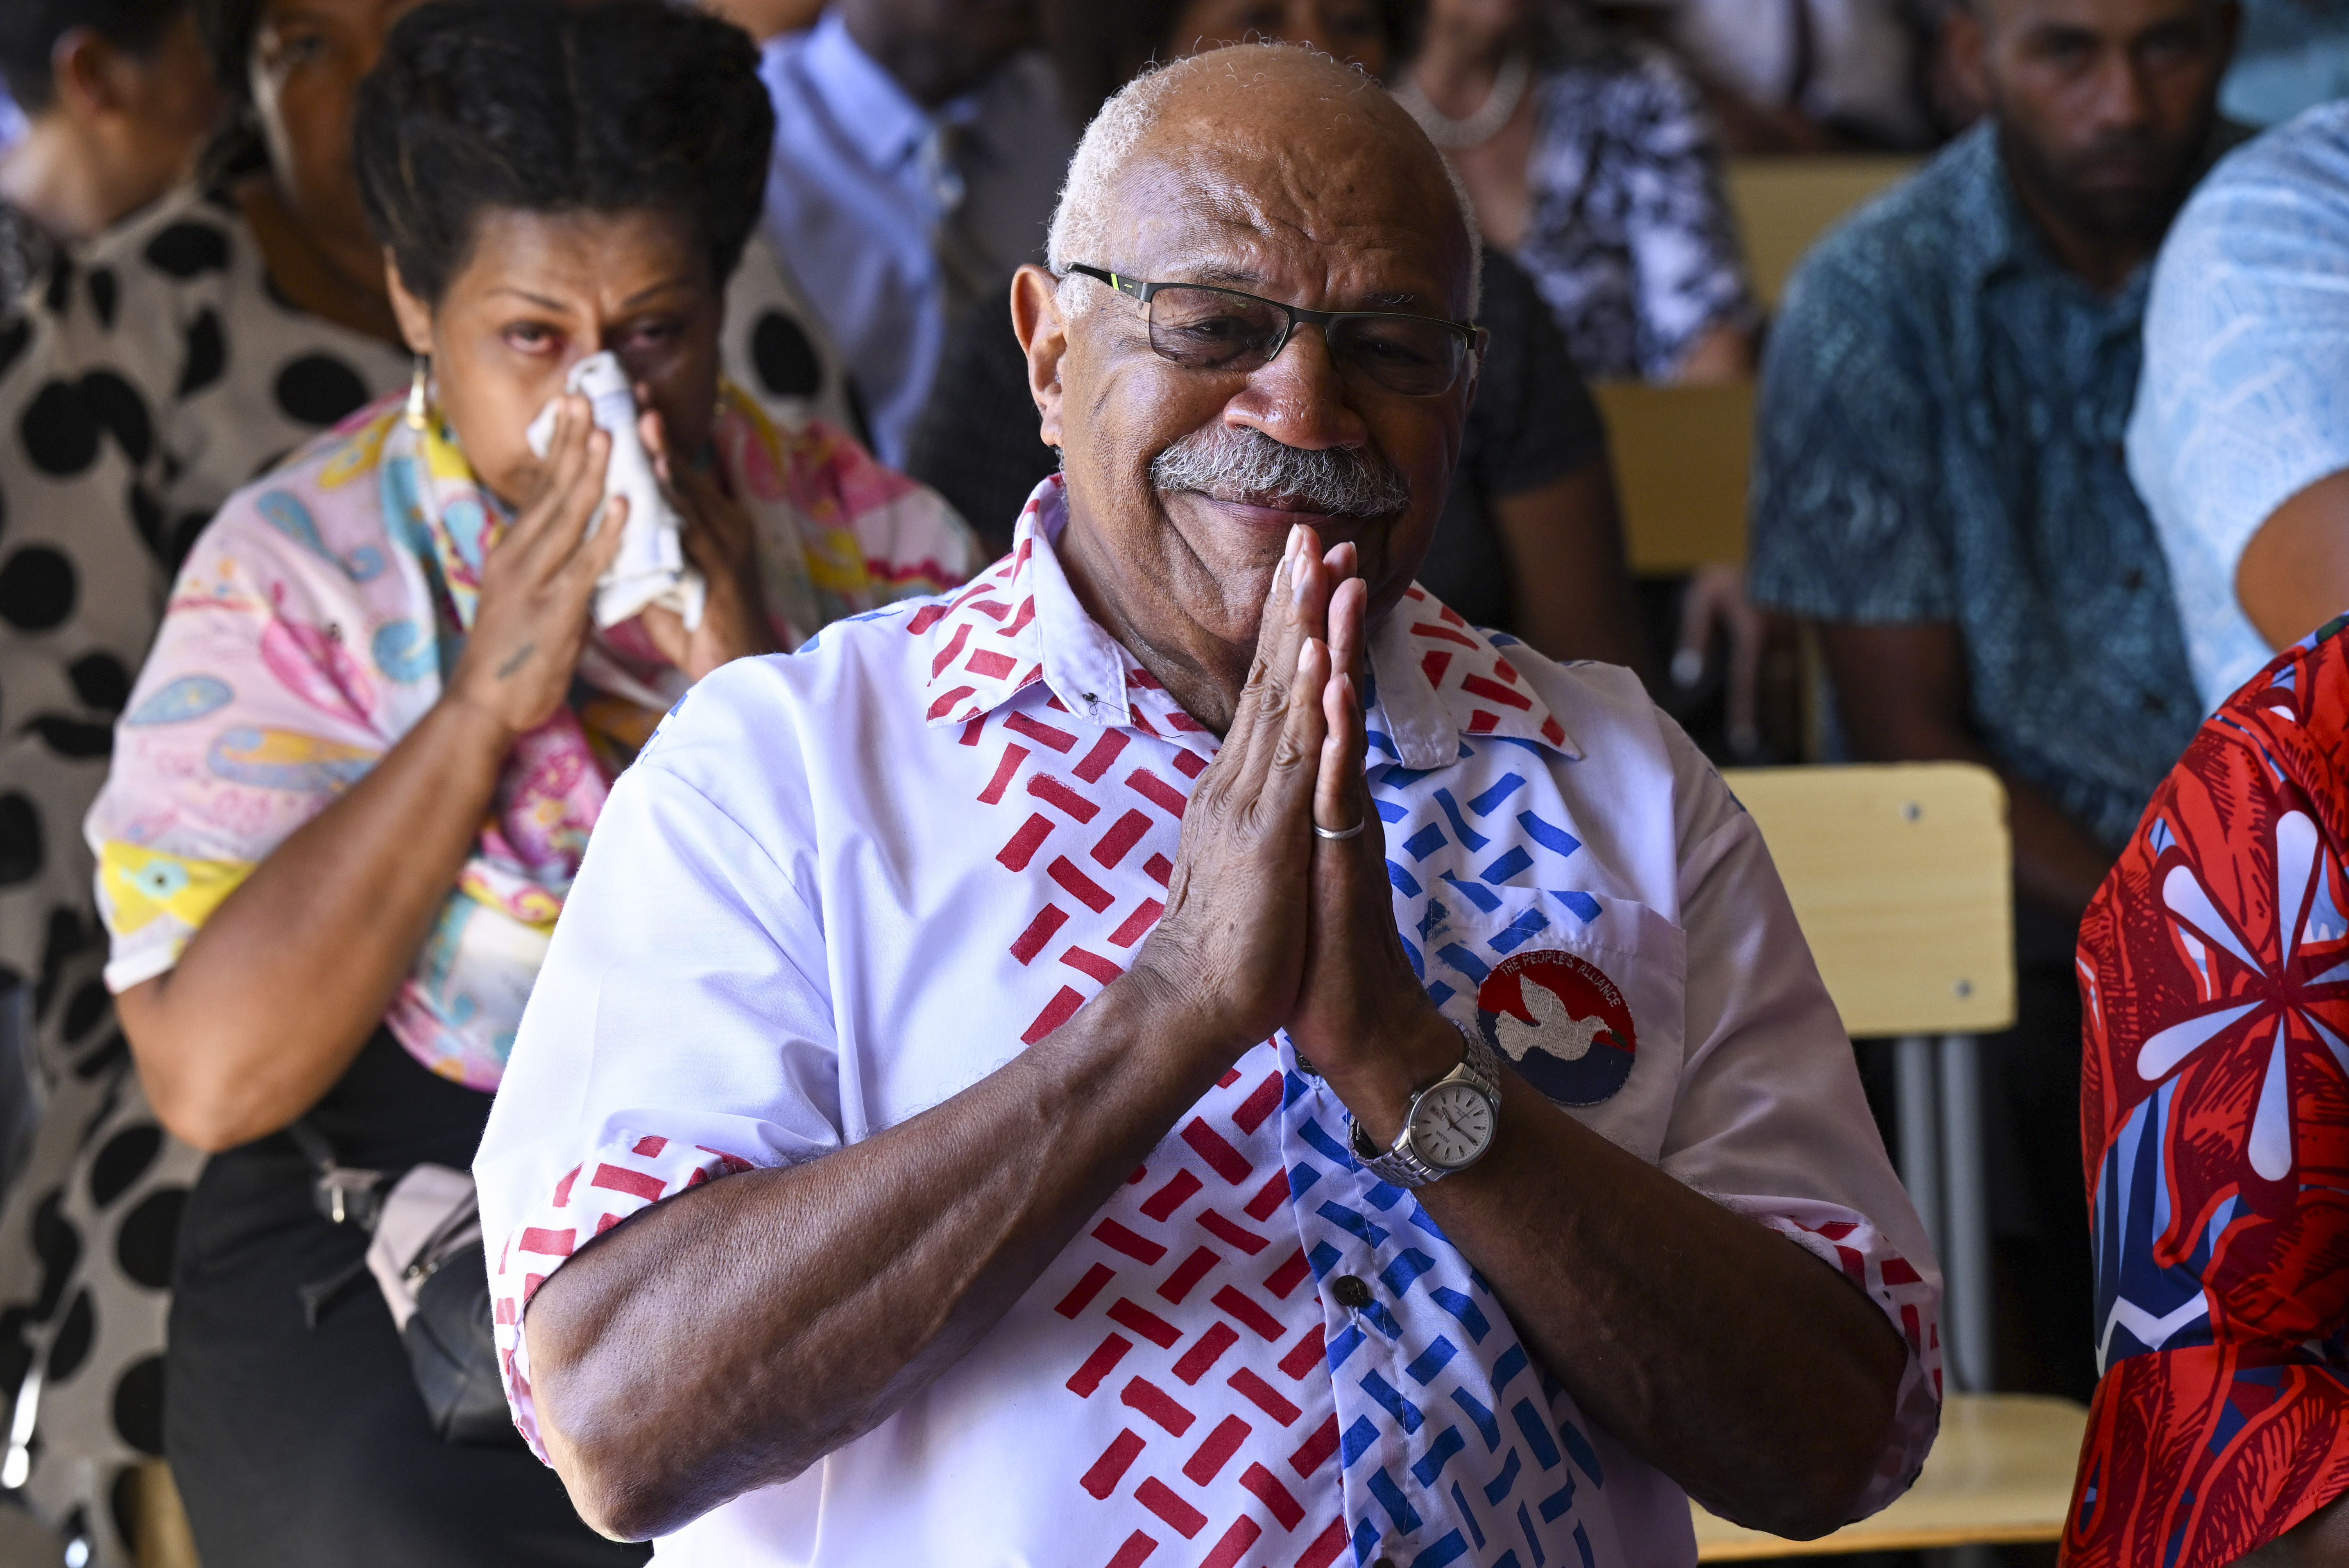 Sitiveni Rabuka elected prime minister of Fiji by lawmakers